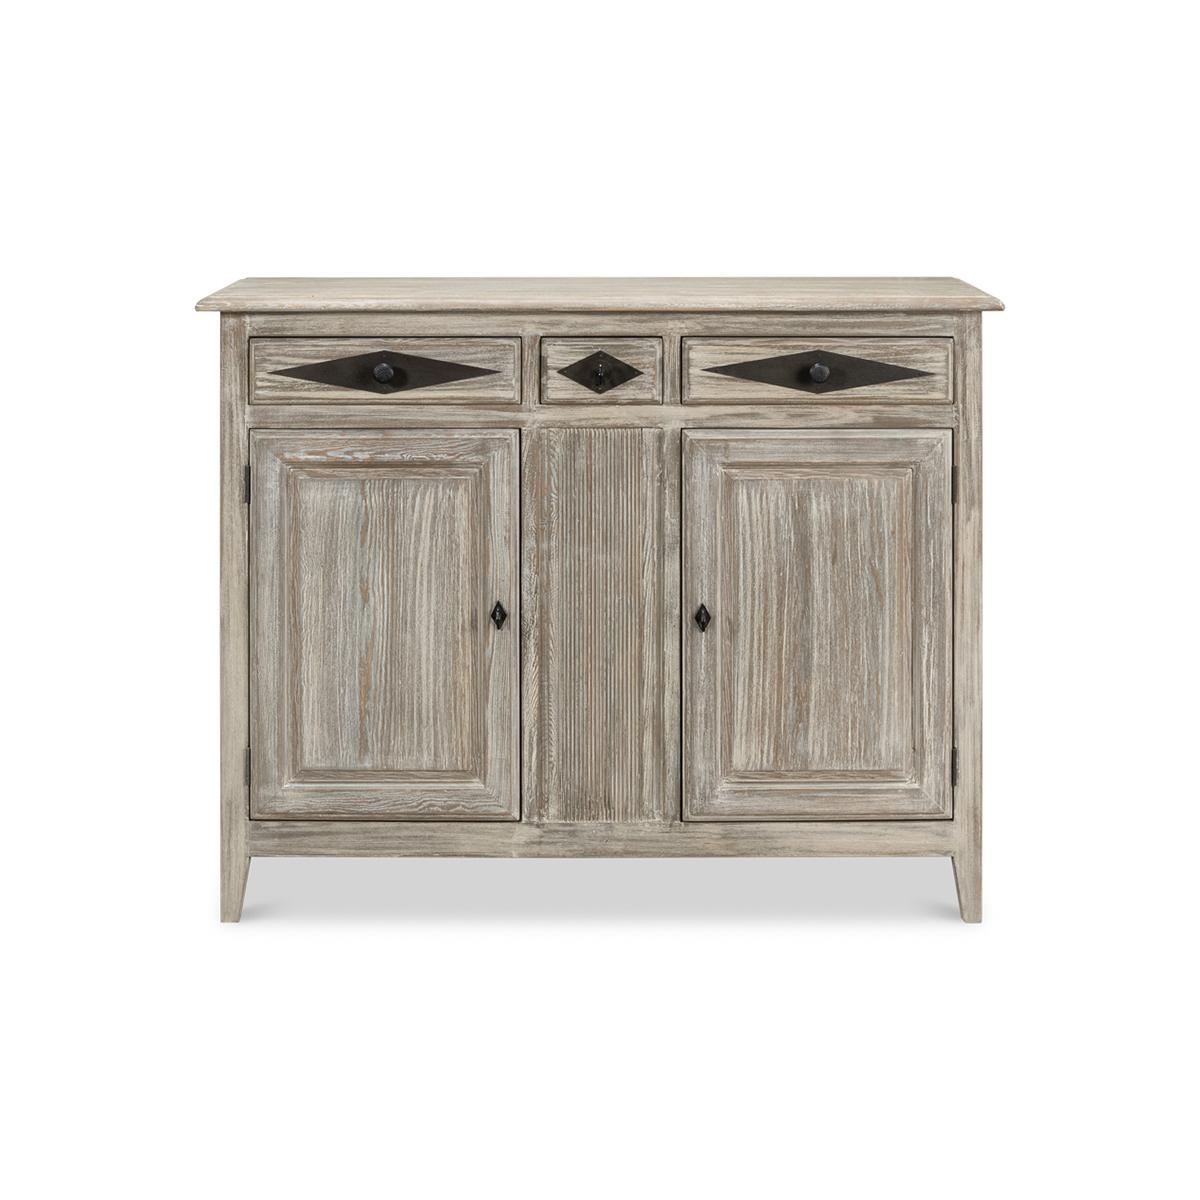 French Directoire Buffet, with custom-designed hand-wrought iron face plates and pulls both accent and accentuate the perfectly sized Buffet. Constructed of pine with two wood doors and three drawers in our Moonskin finish, the buffet sideboard